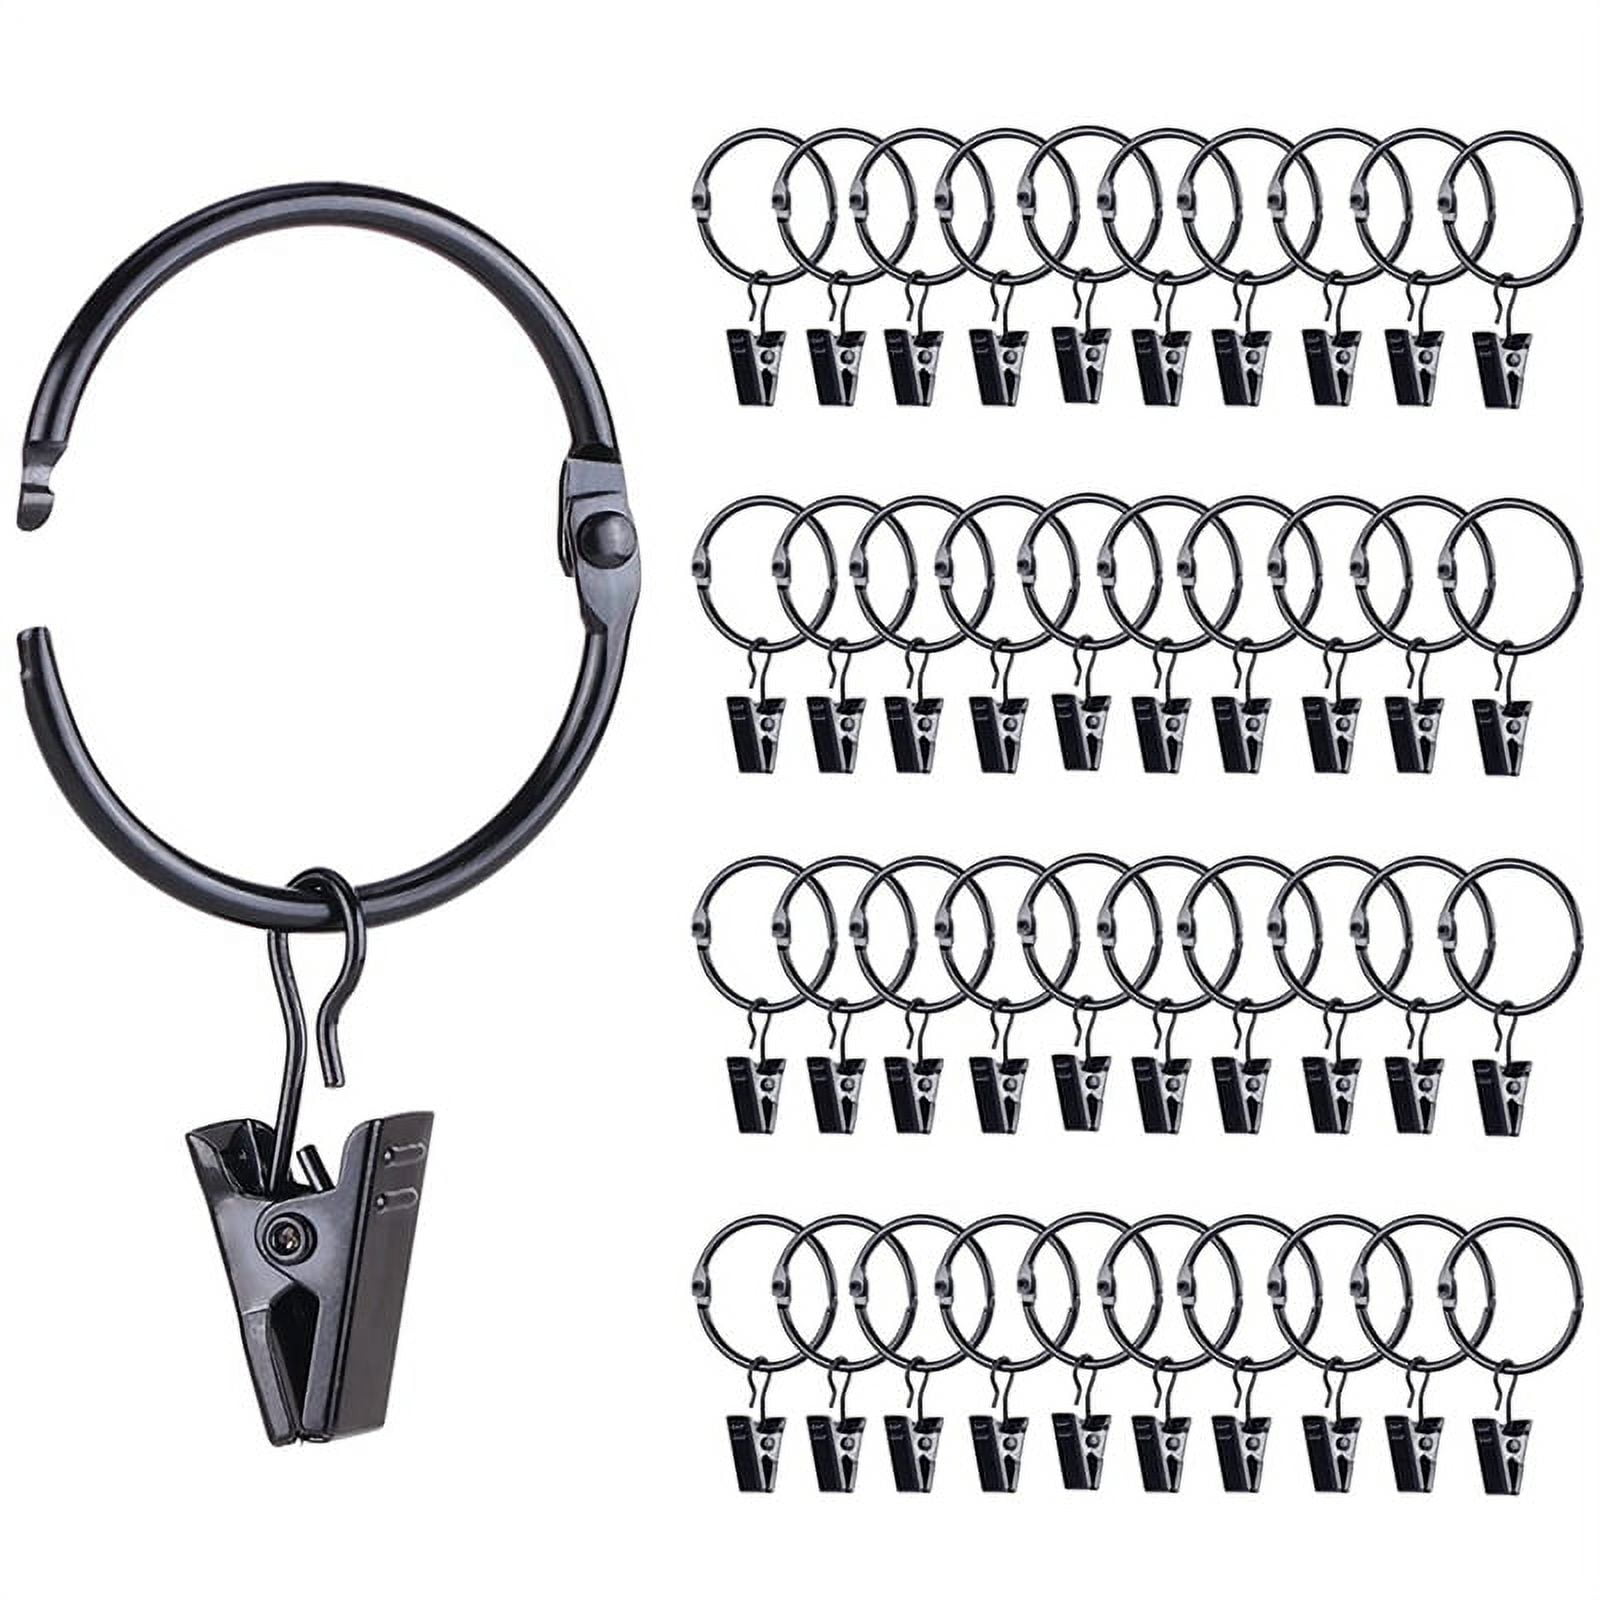 50pcs Heavy Duty Curtain Track Glider Hooks Curtain Track Sliding Rollers 